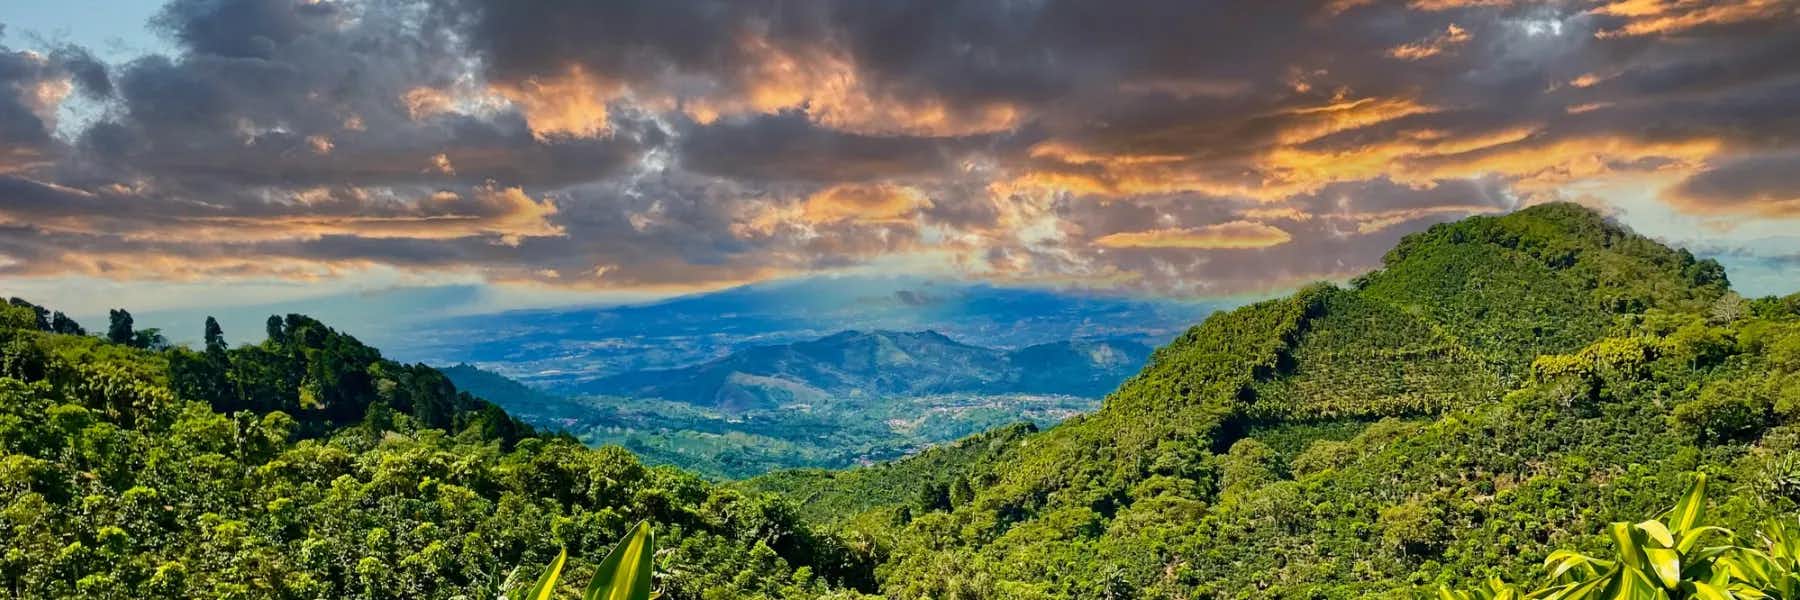 We Swapped the American Dream for a Dream Life in Costa Rica